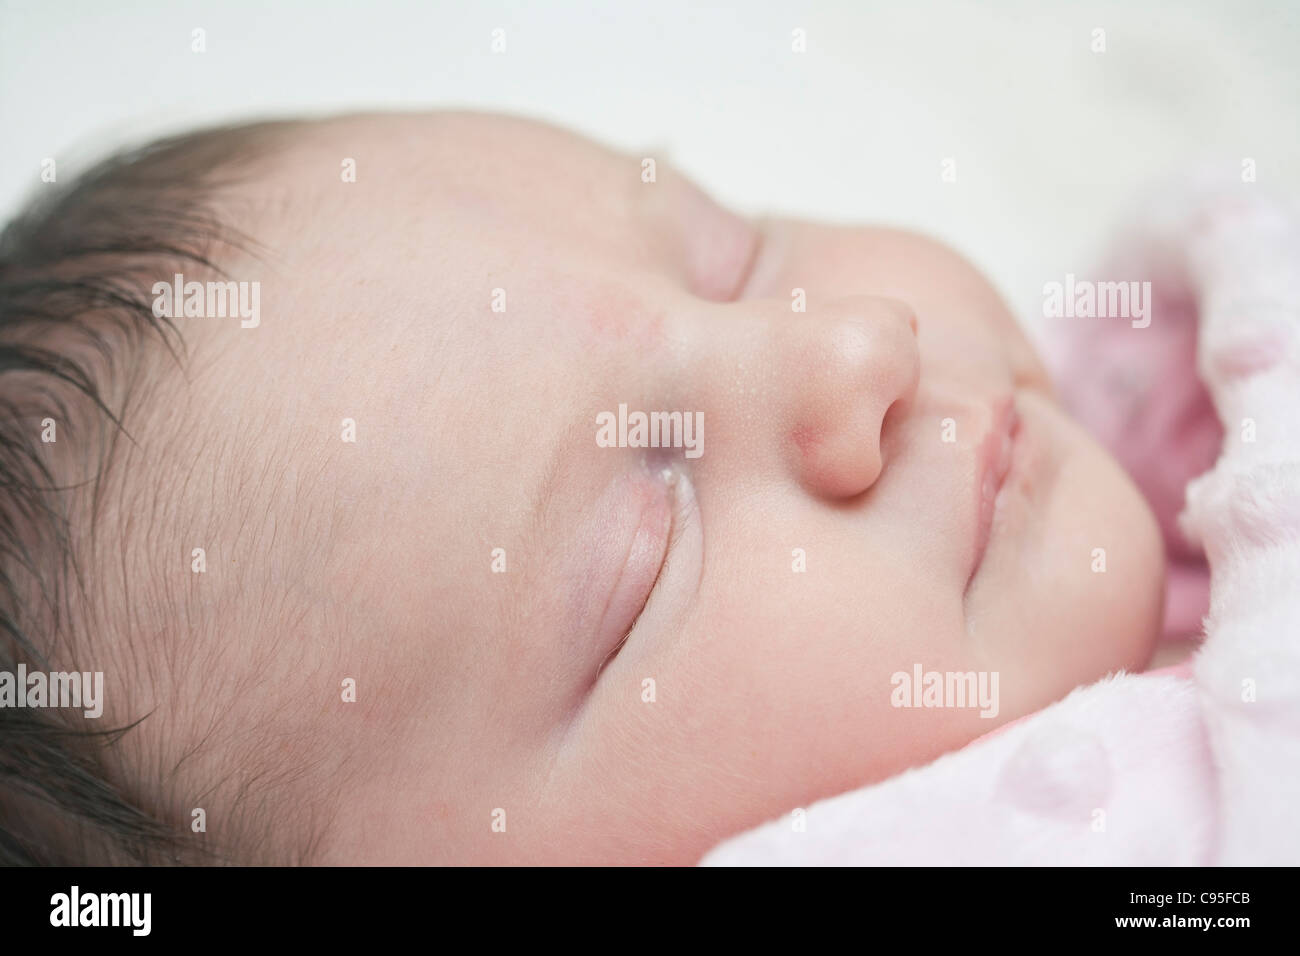 Baby Girl sleeping Banque D'Images